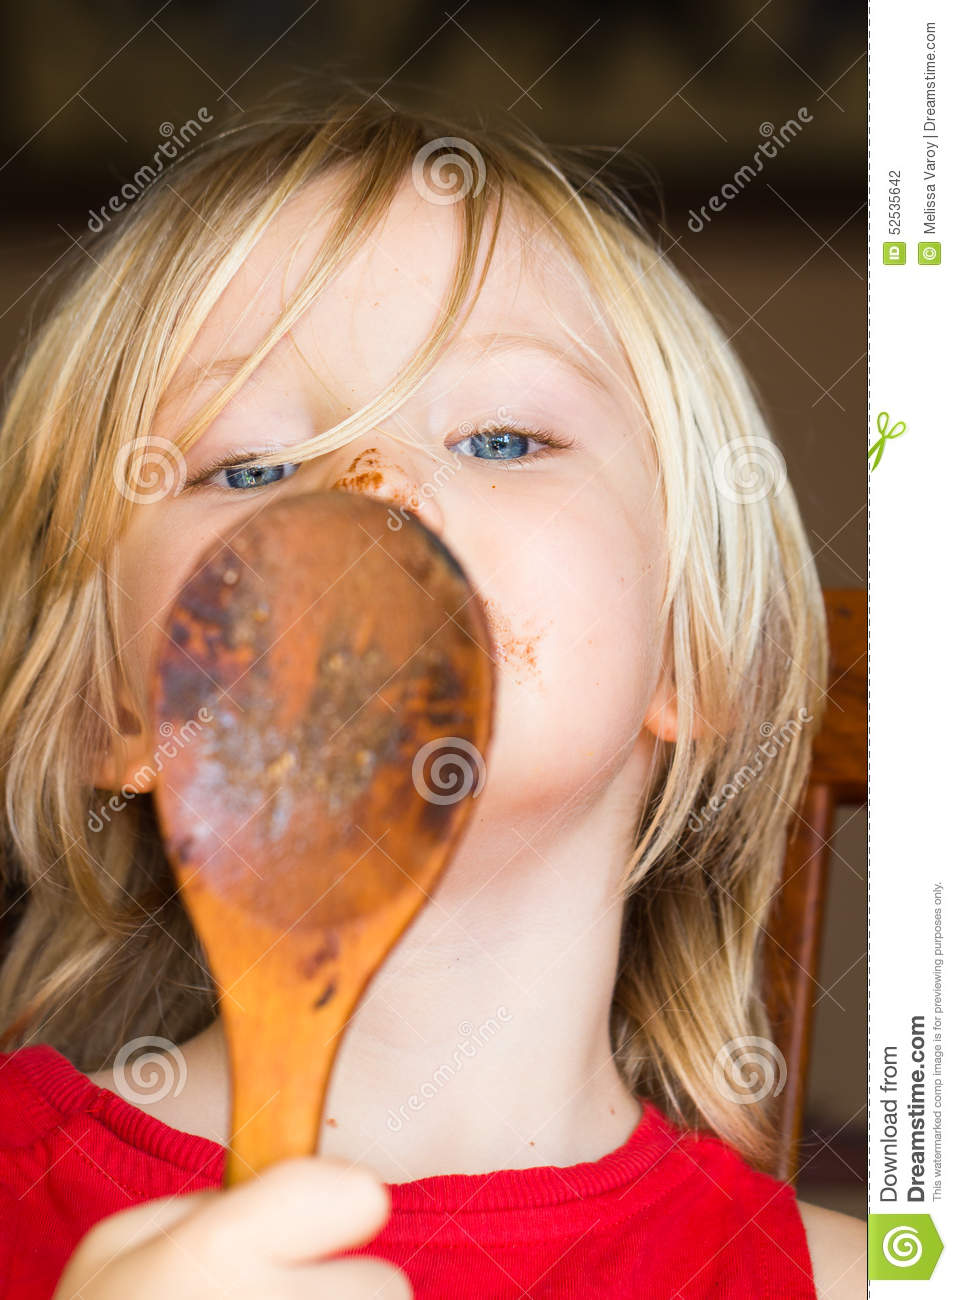 Cute Child With A Messy Face Licking Chocolate Off A Wooden Spoon